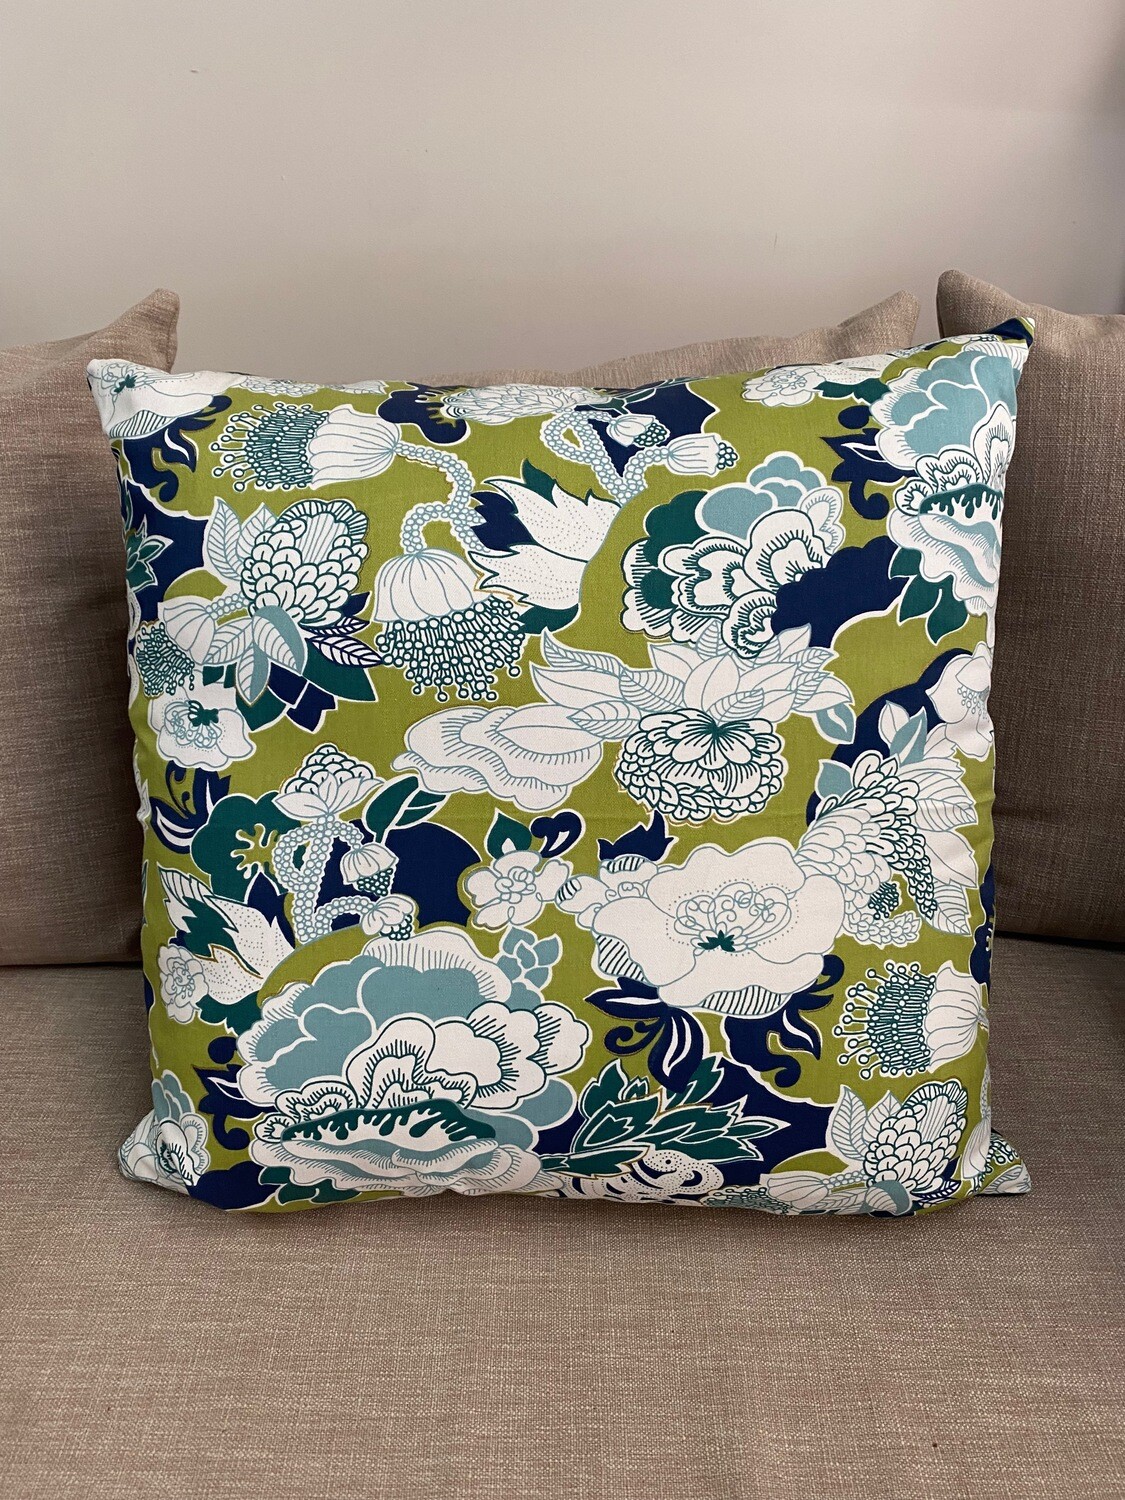 Large scatter cushion in floral fabric